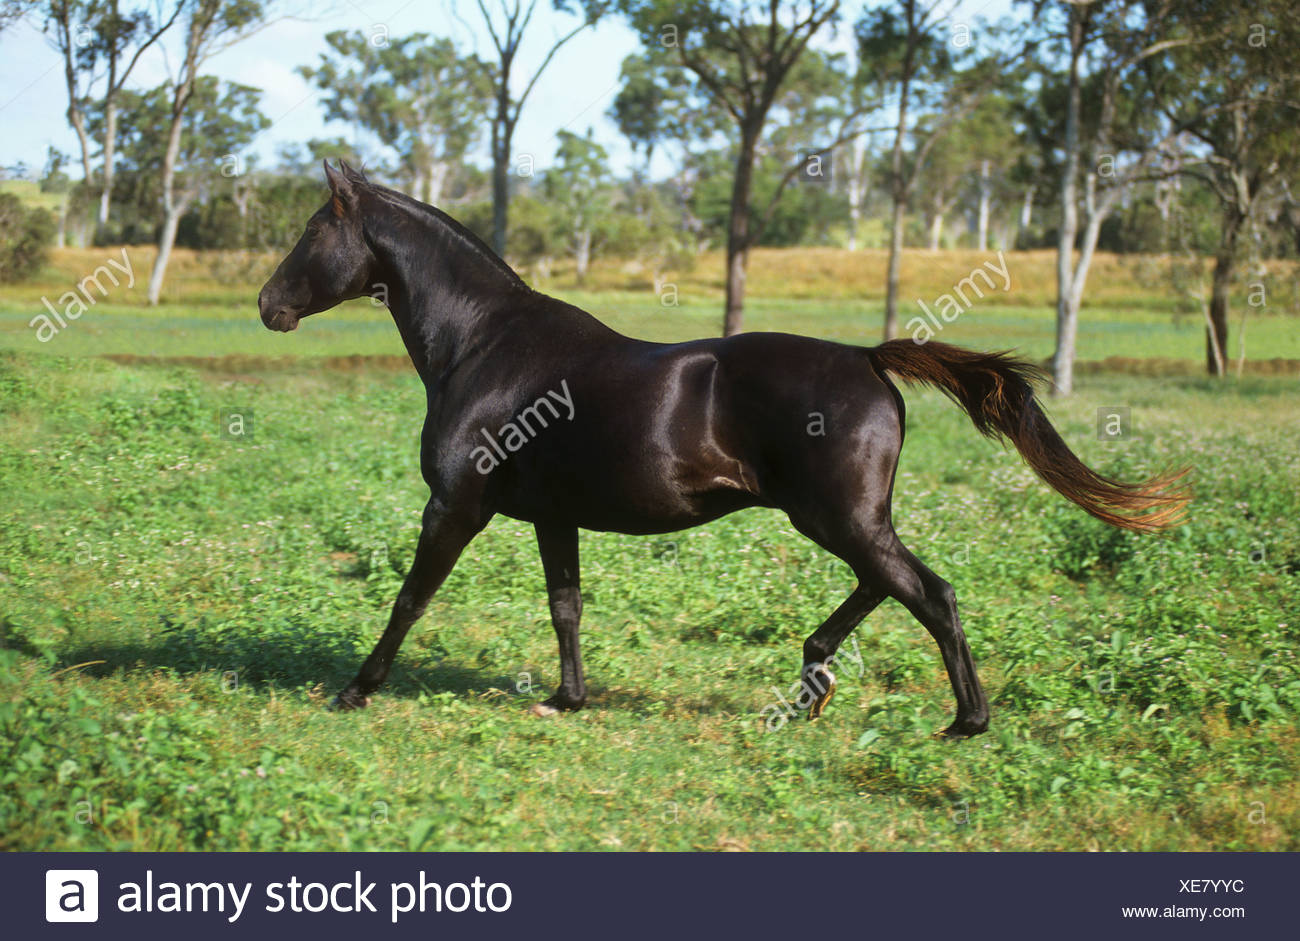 Australian Warmblood Horse Walking High Resolution Stock Photography and  Images - Alamy